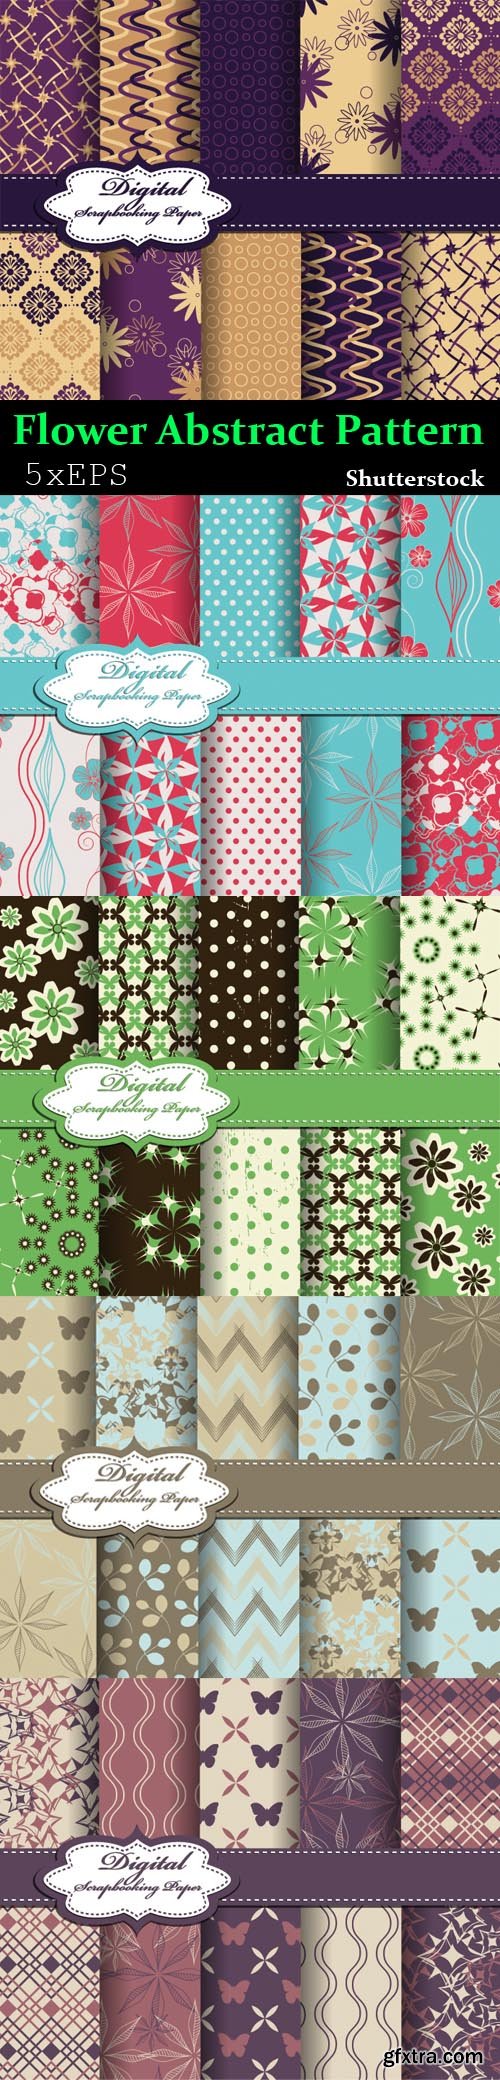 Set of Vector Flower Abstract Pattern Paper for Scrapbook